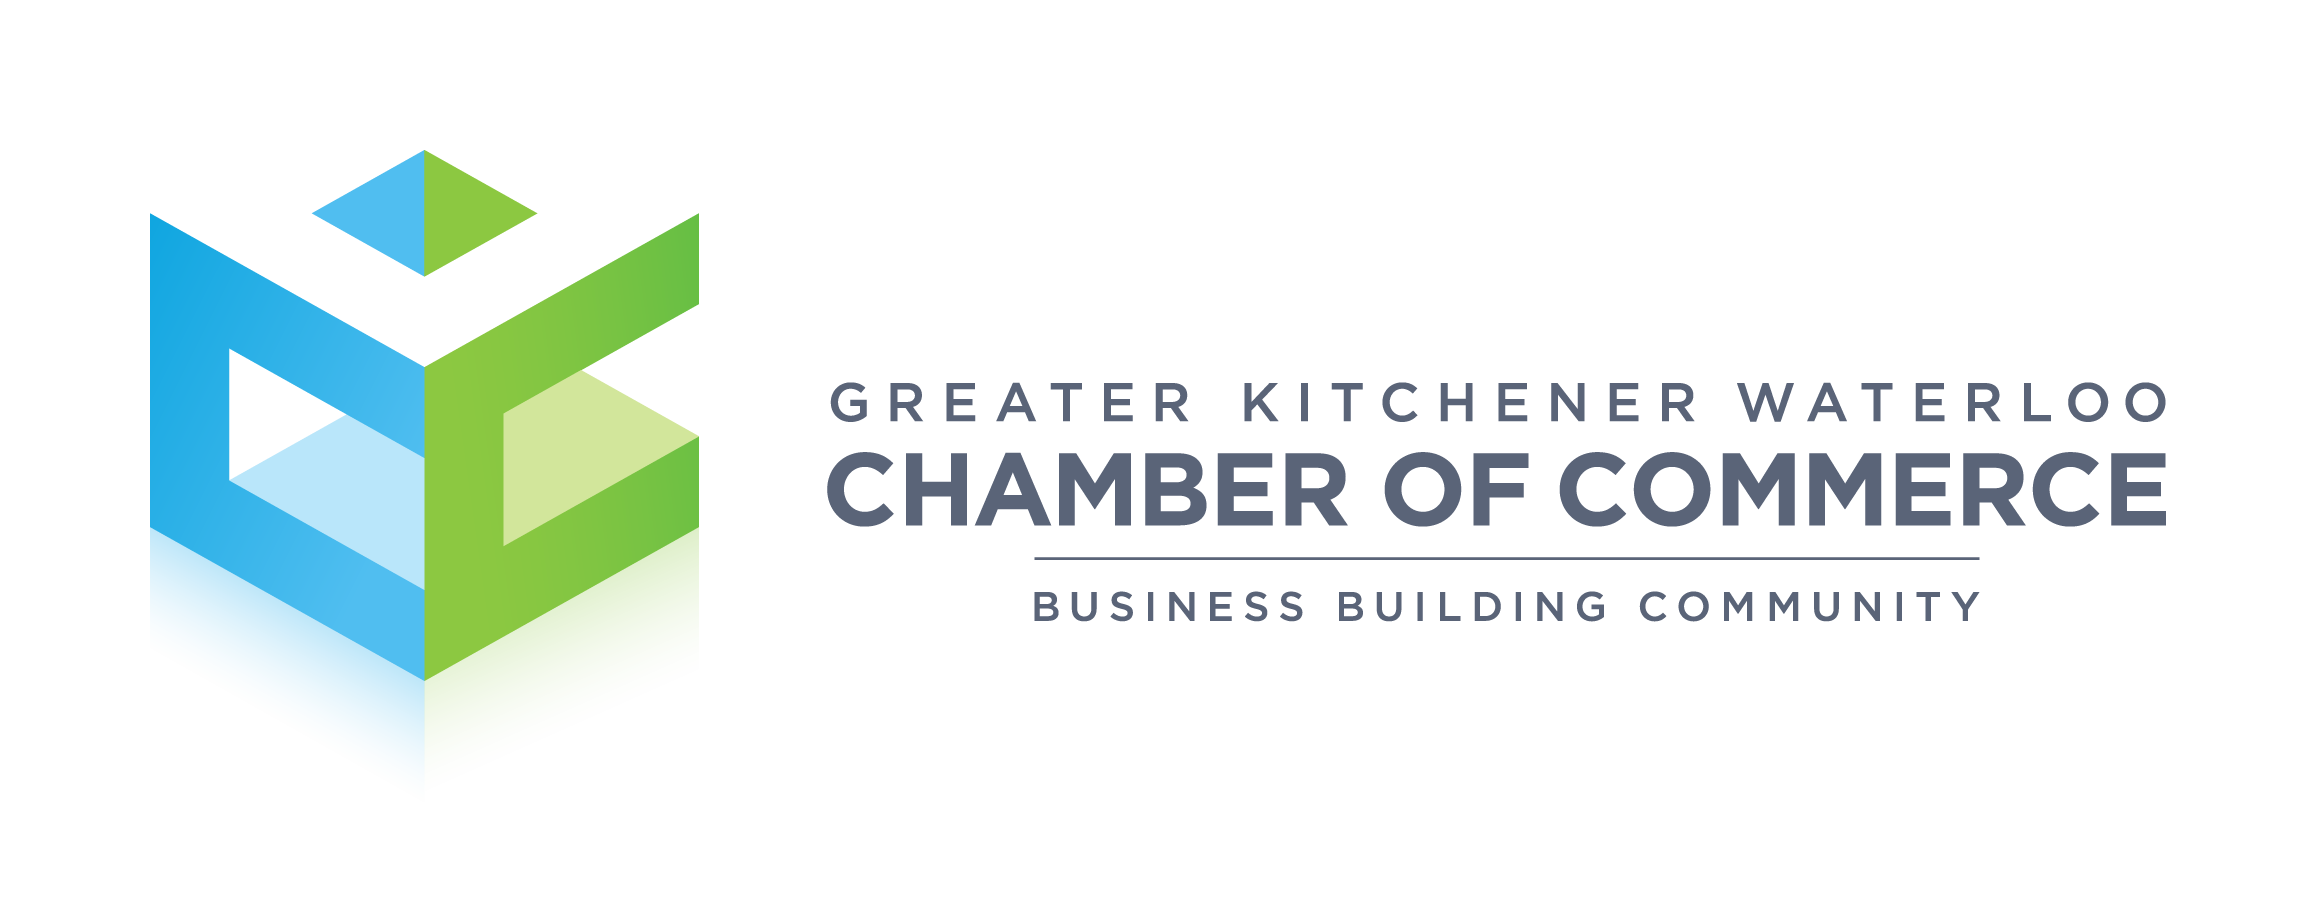 A community of business owners in the Kitchener Waterloo area dedicated to building a better city and networking.